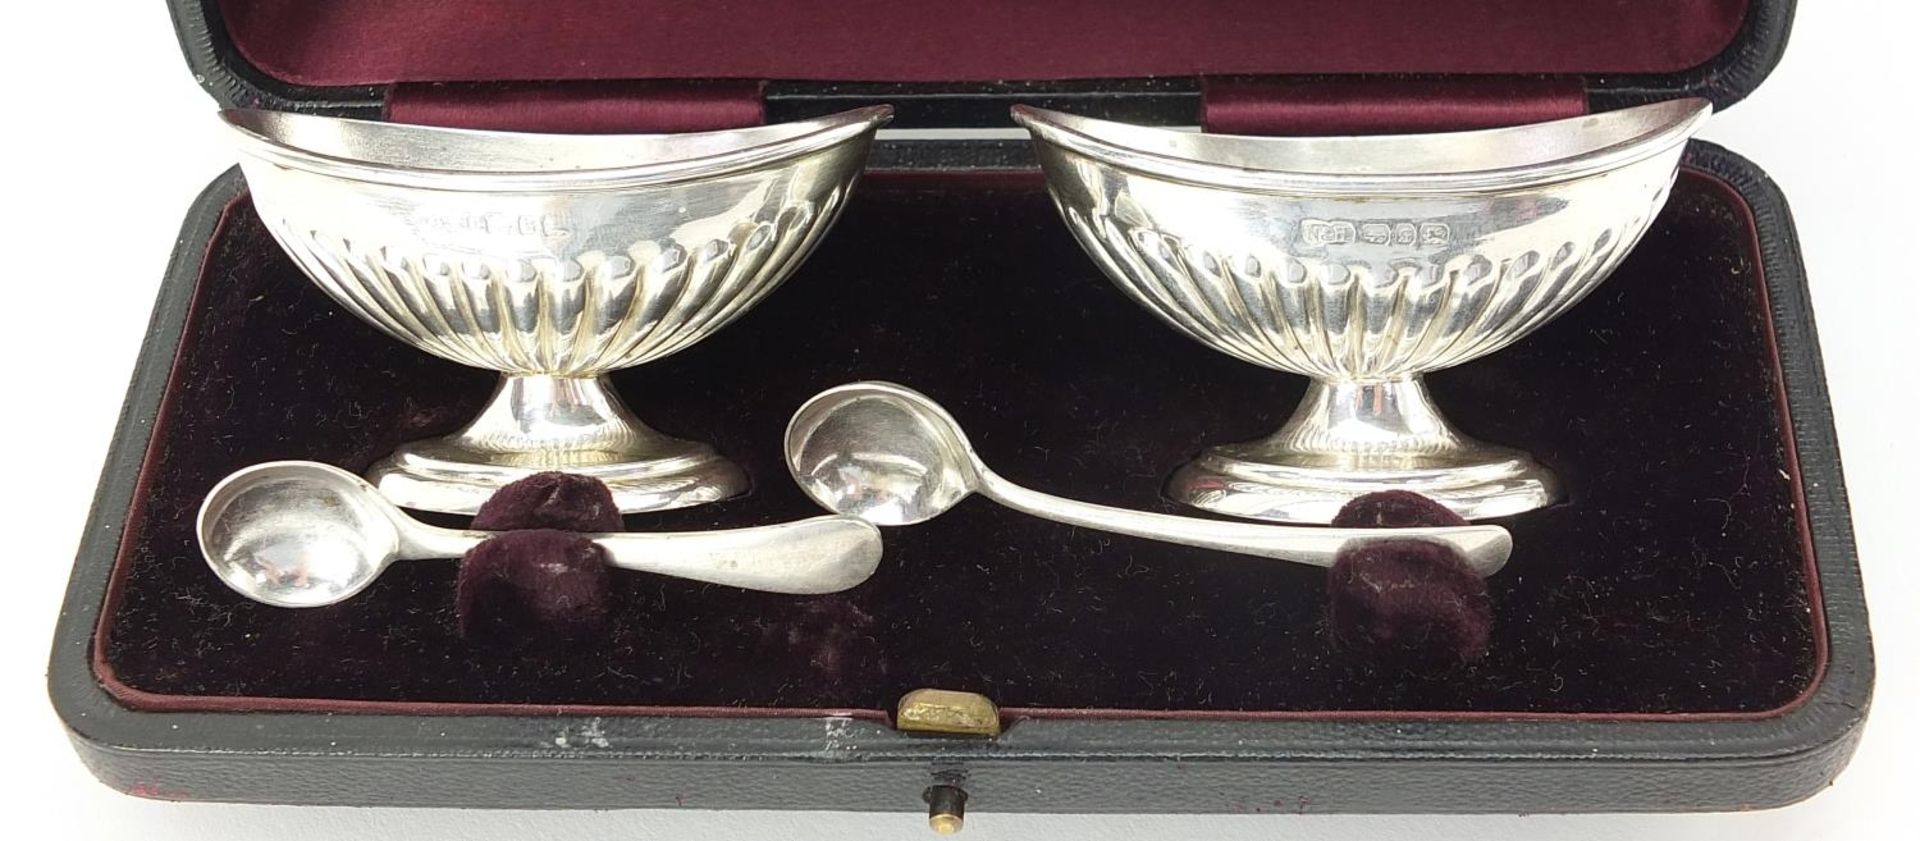 Nathan & Hayes, Pair of Victorian silver salts with a silver spoon and matched silver plated spoon - Image 2 of 4